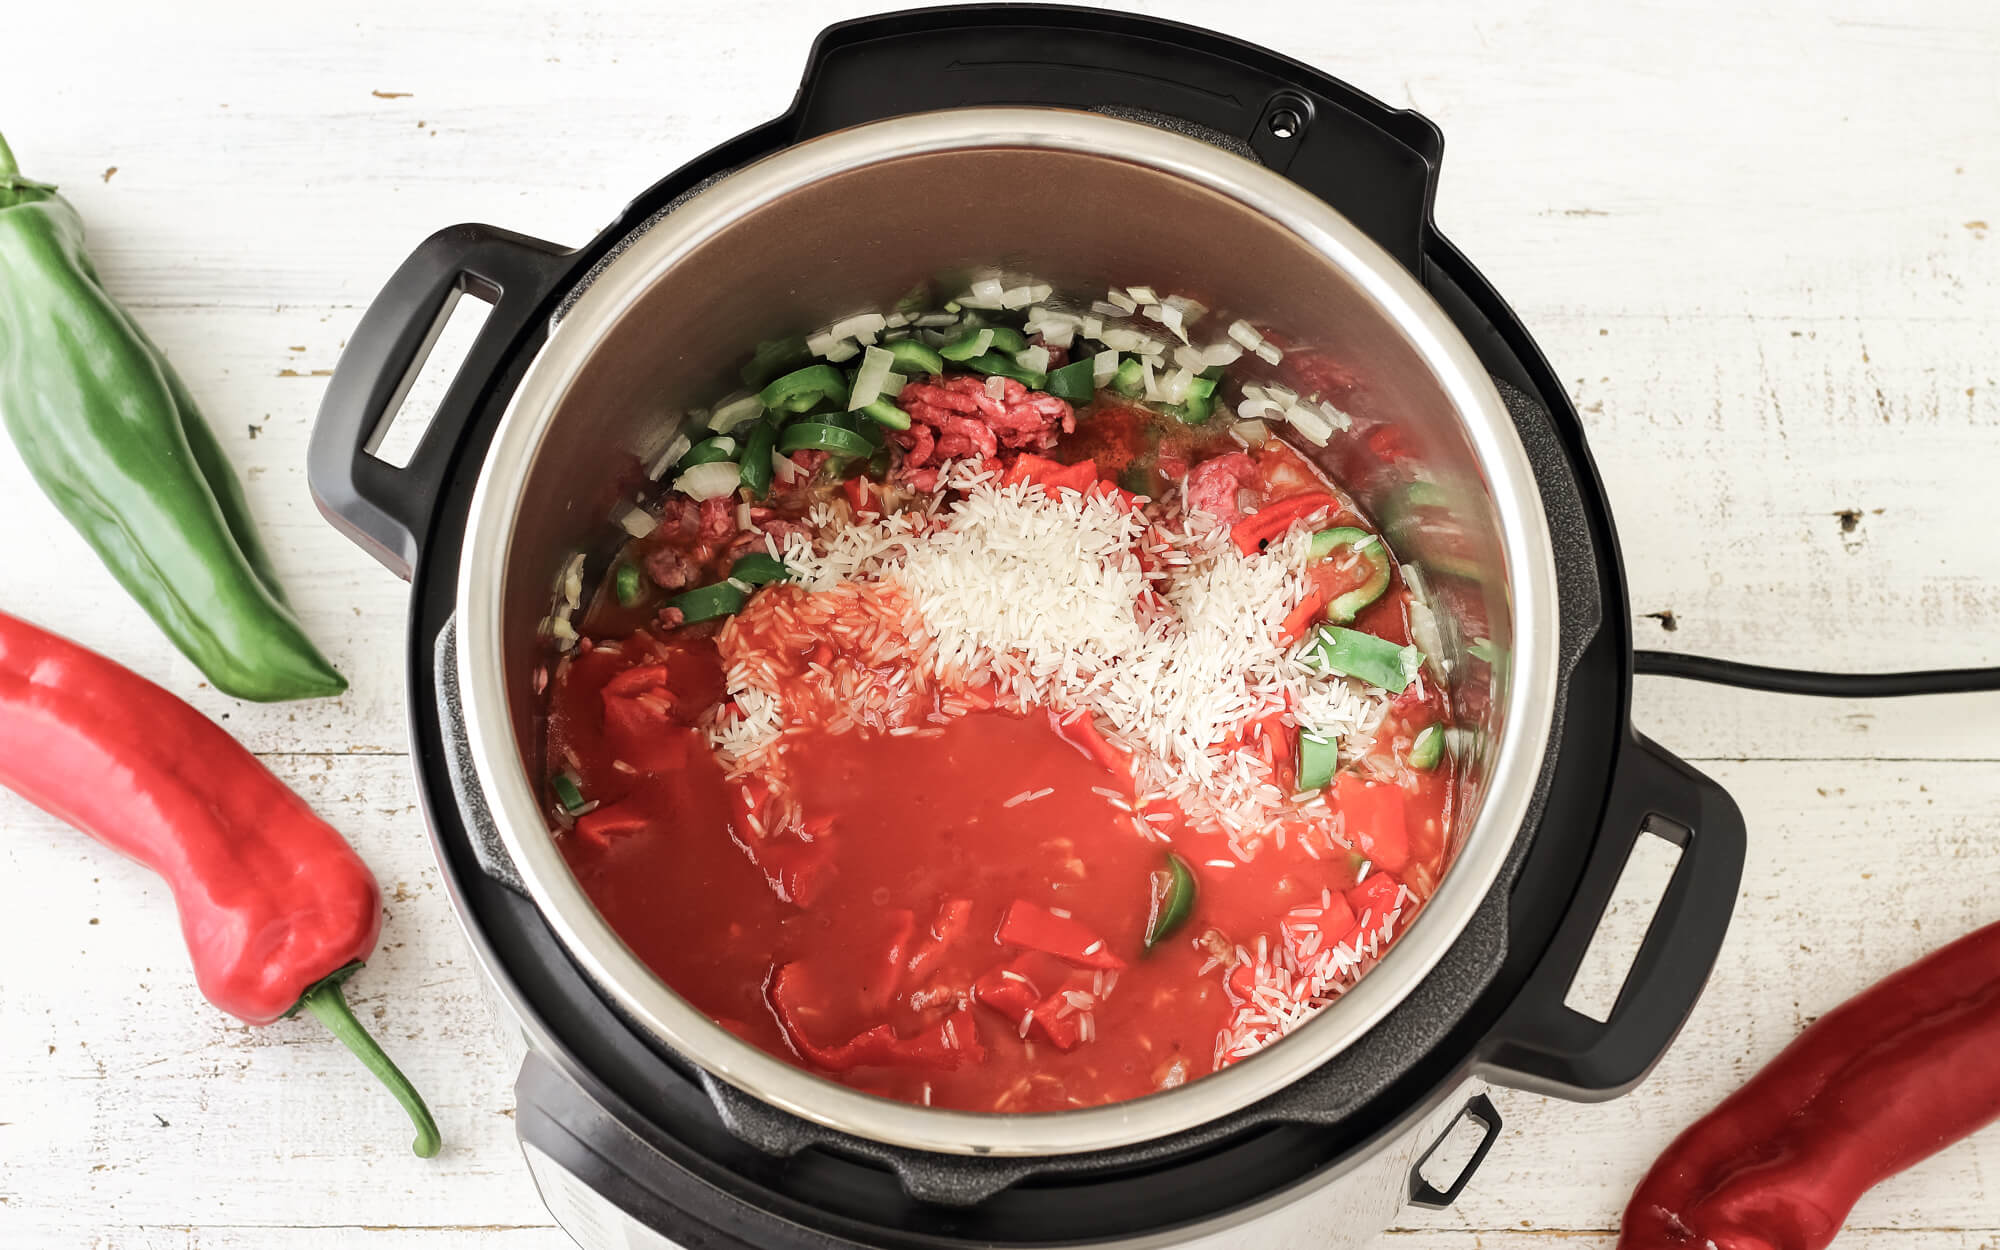 Pressure cooking a meal